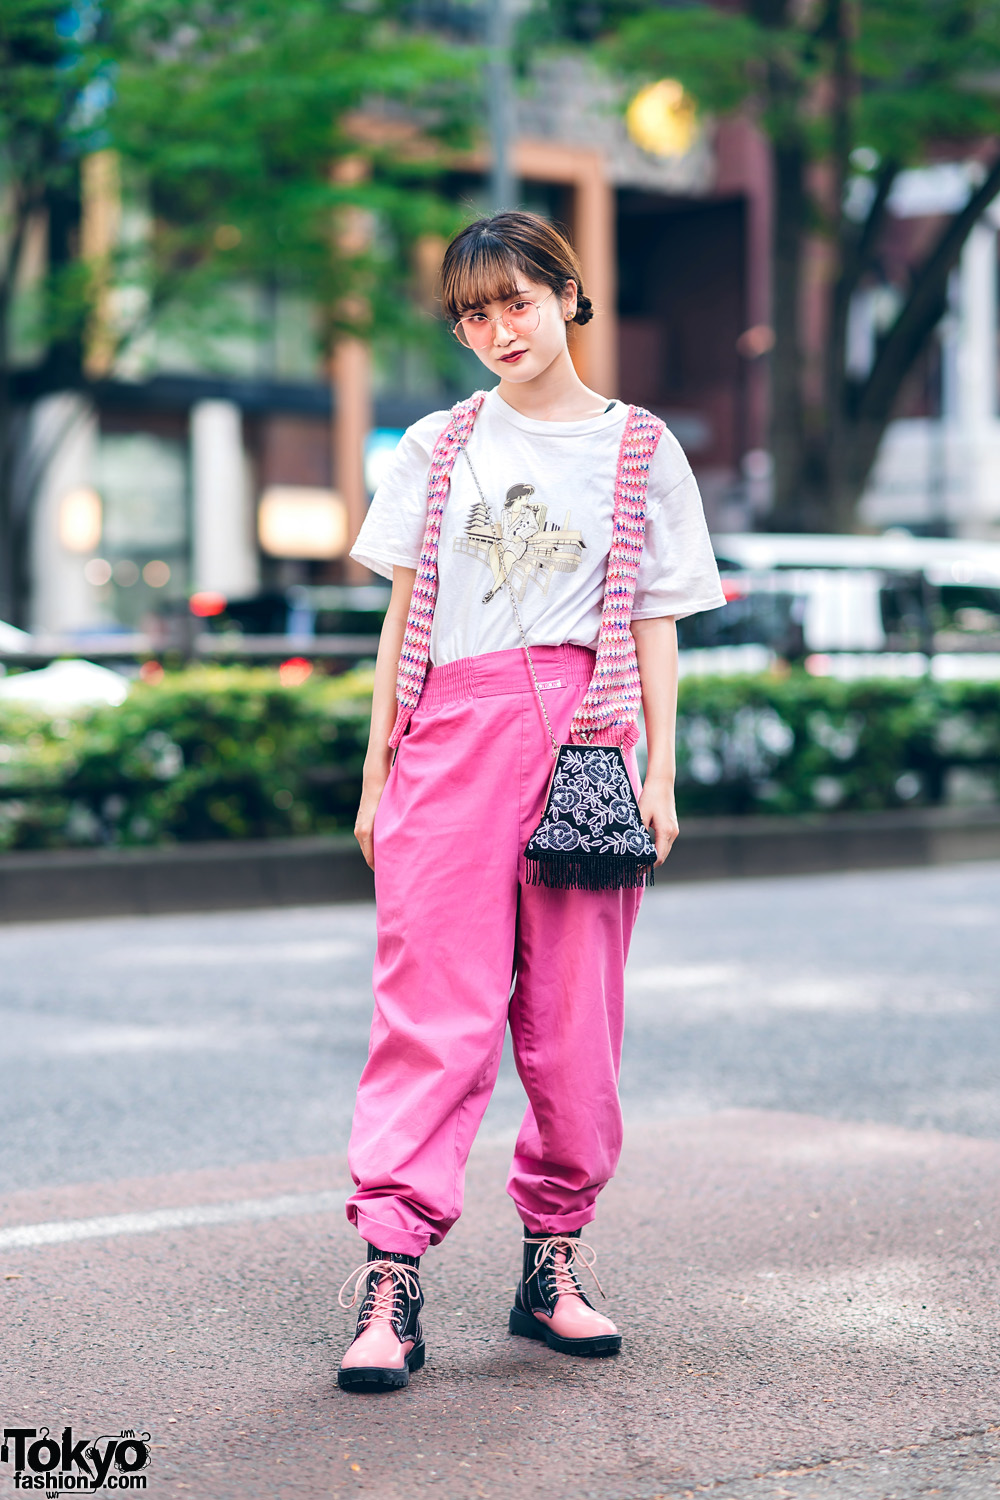 Pink Tokyo Street Style w/ Braided Buns, Pink Glasses, Knit Vest, Printed Shirt, Cherokee Cuffed Pants, Fringed Bag & Yosuke Two-Tone Boots